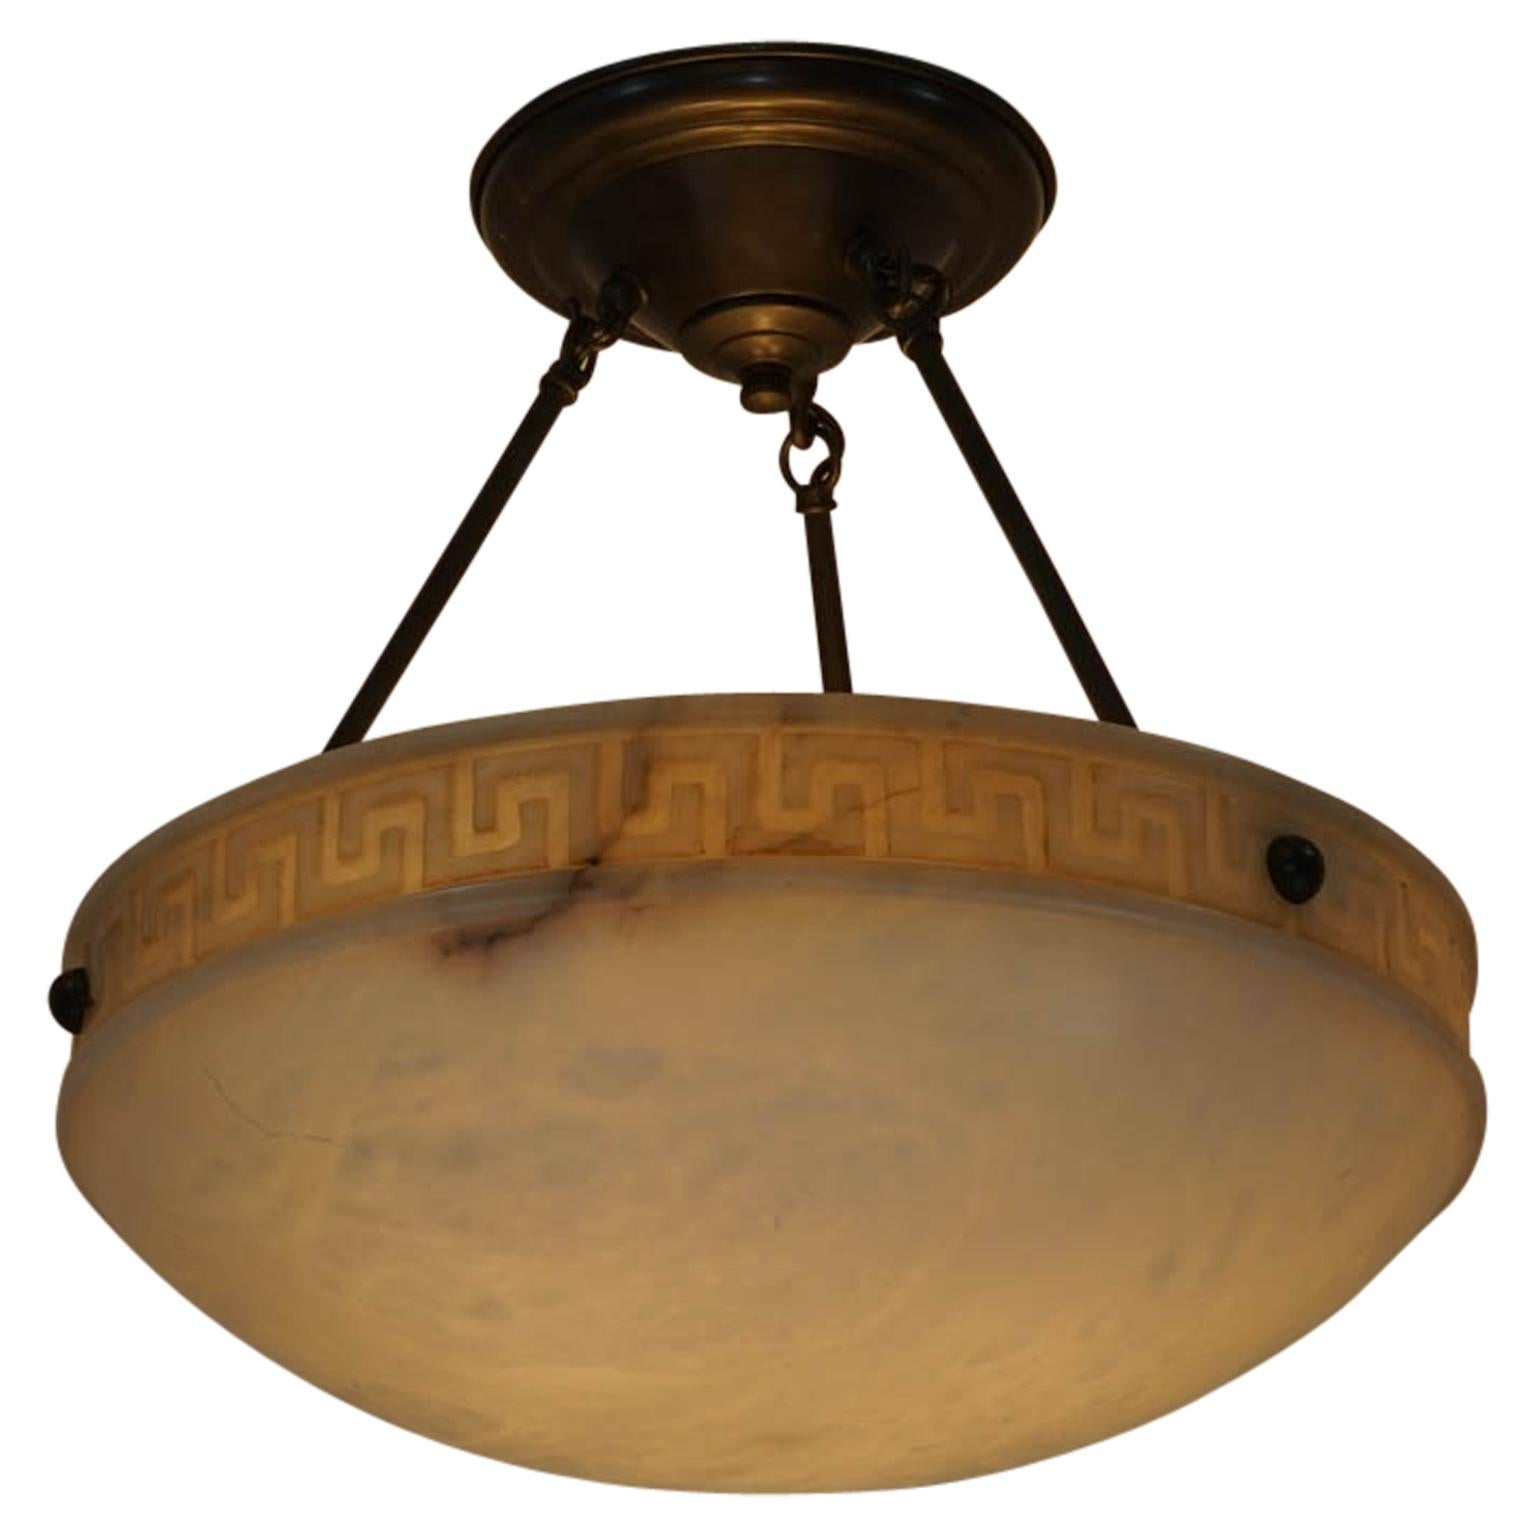 A warm white alabaster shade is suspended from three rods. A stylized Greek key has been carved into the upper rim of the shade.